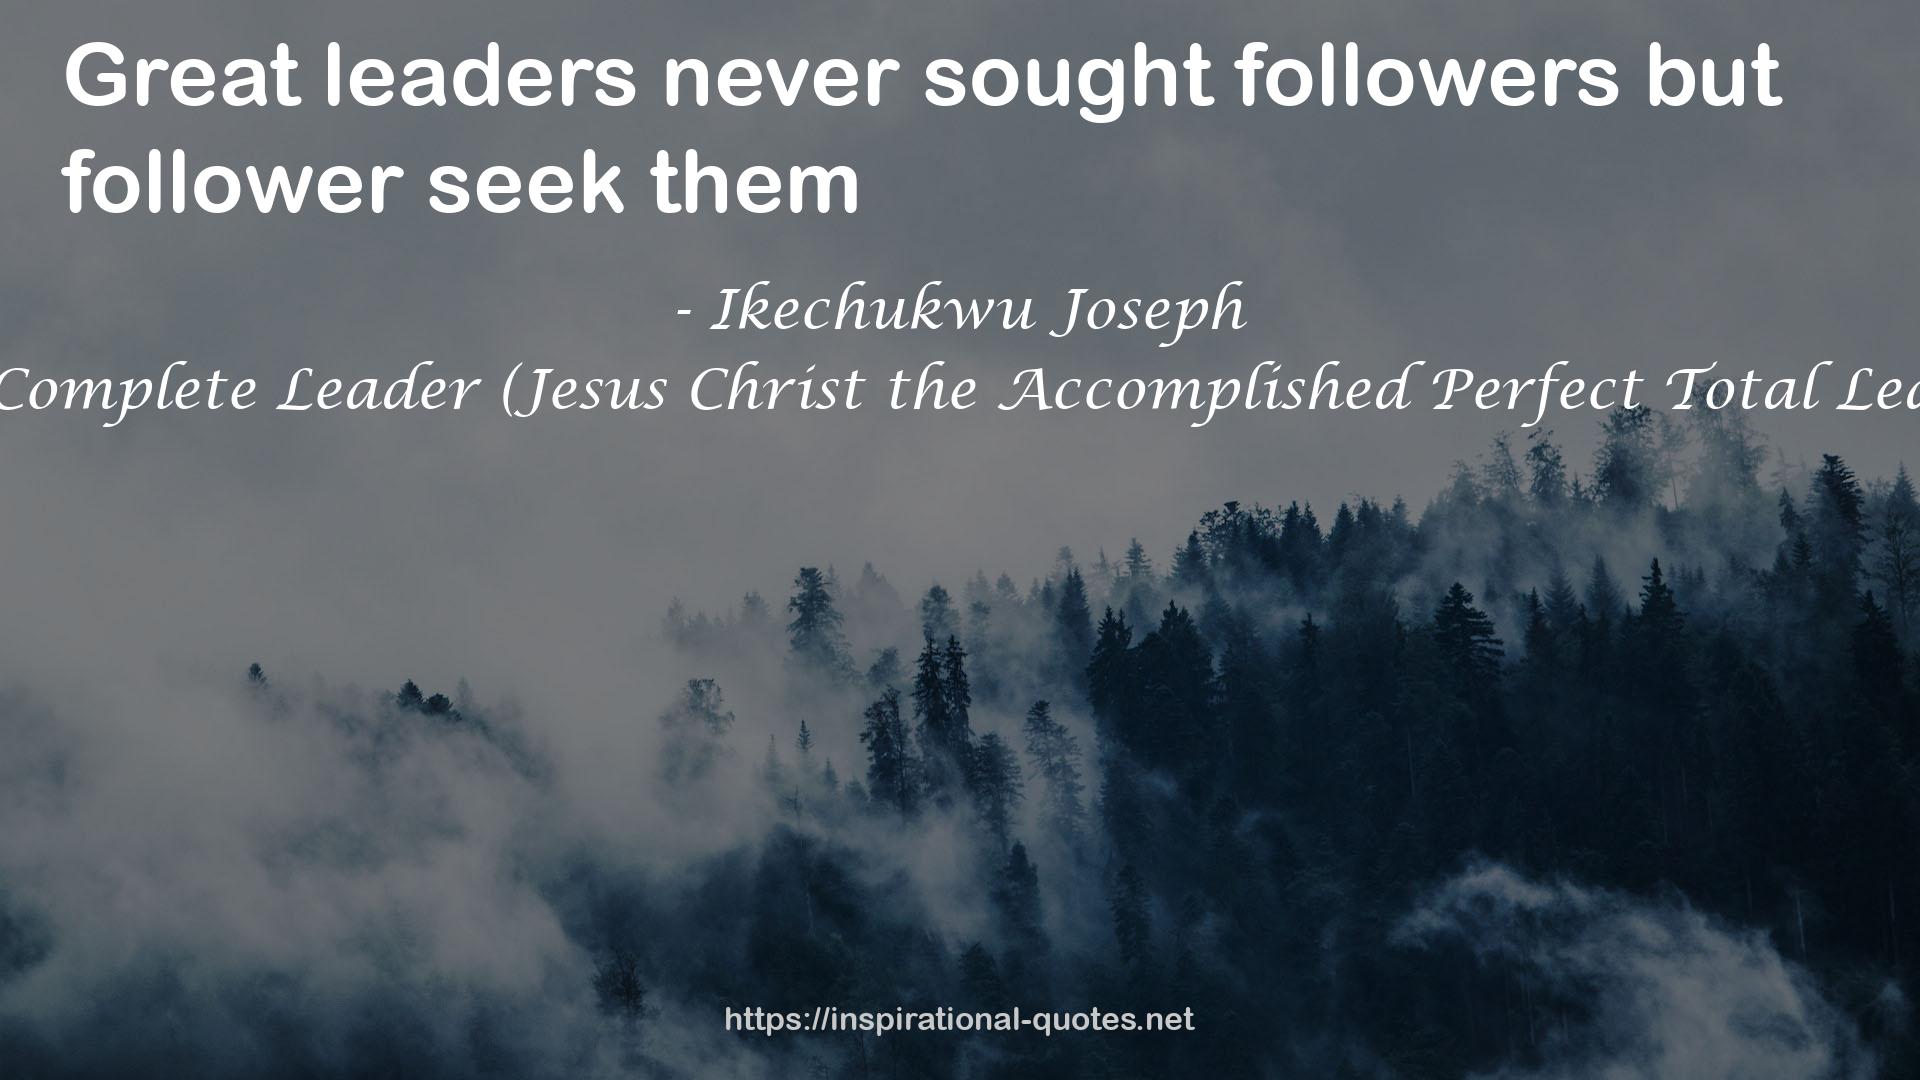 The Complete Leader (Jesus Christ the Accomplished Perfect Total Leader) QUOTES